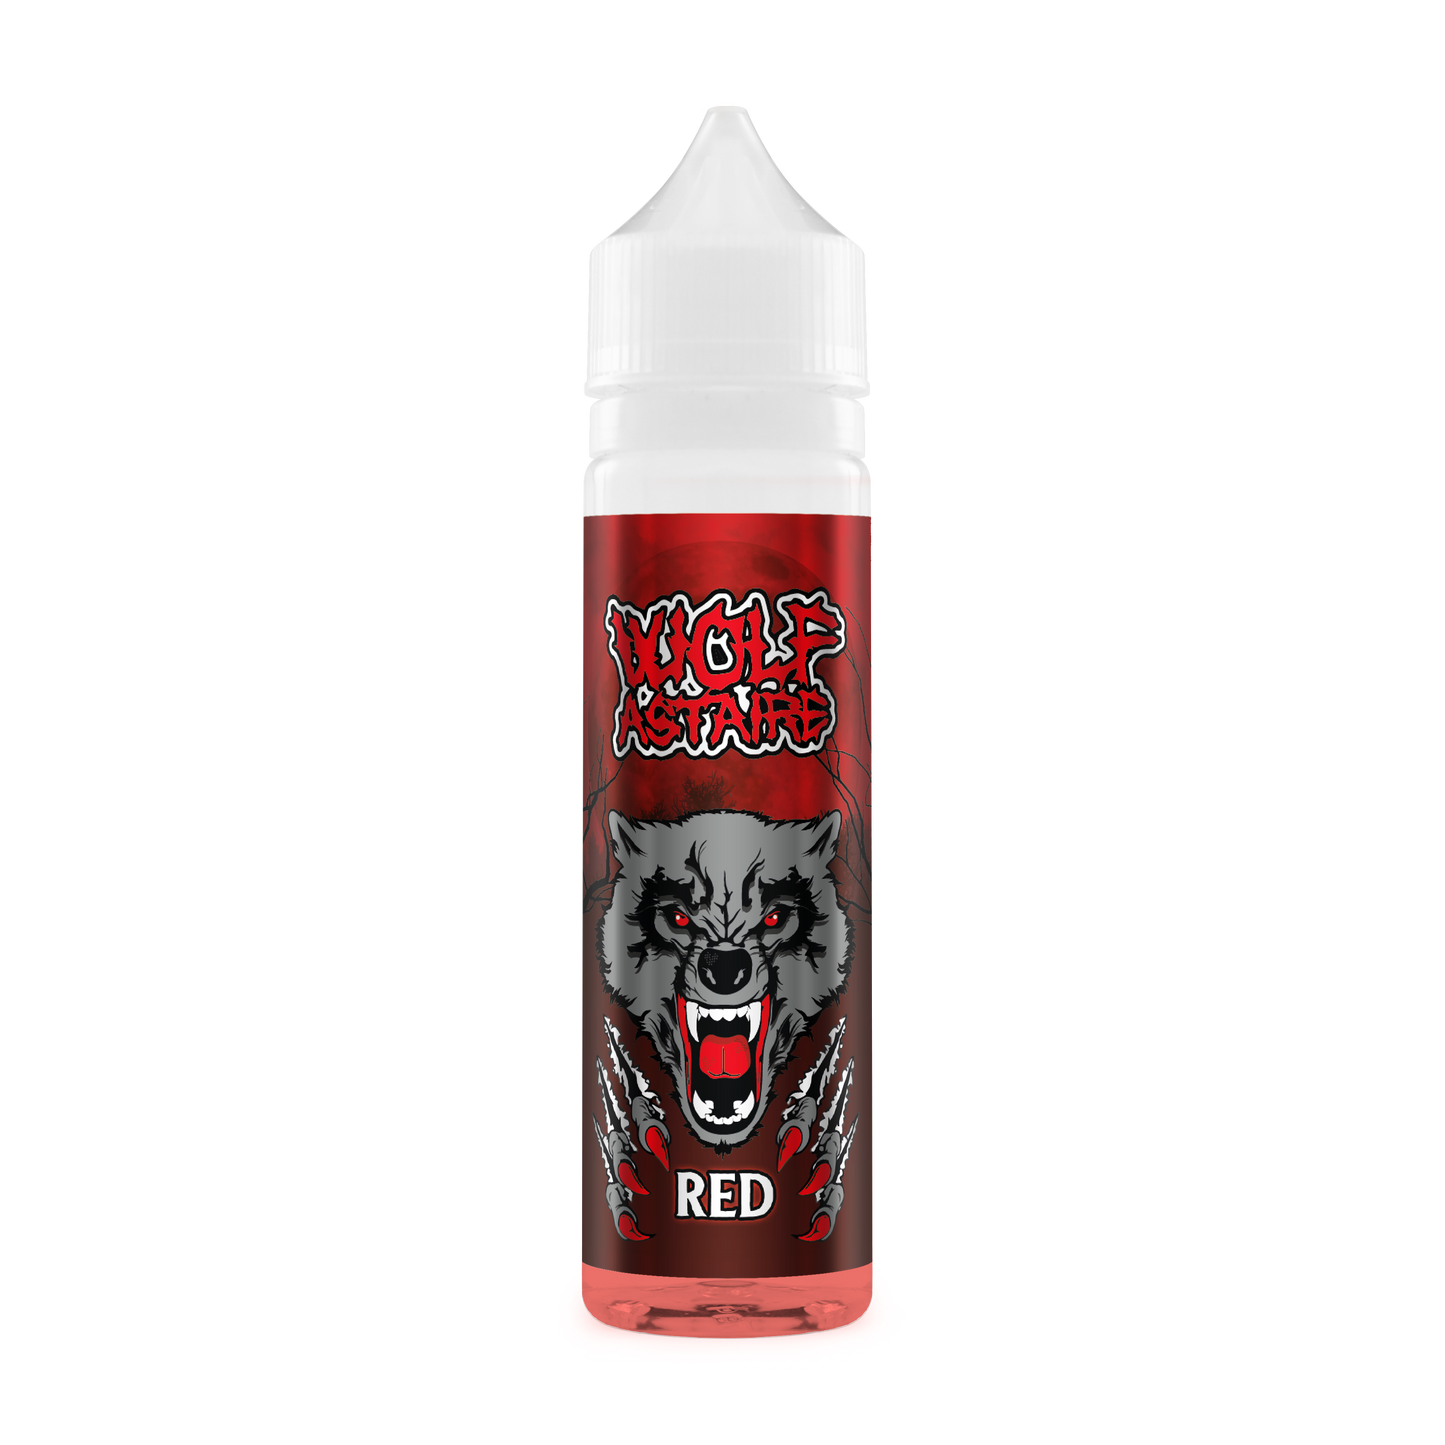 Wolf Astaire - Red 50ml - The Ace Of Vapez